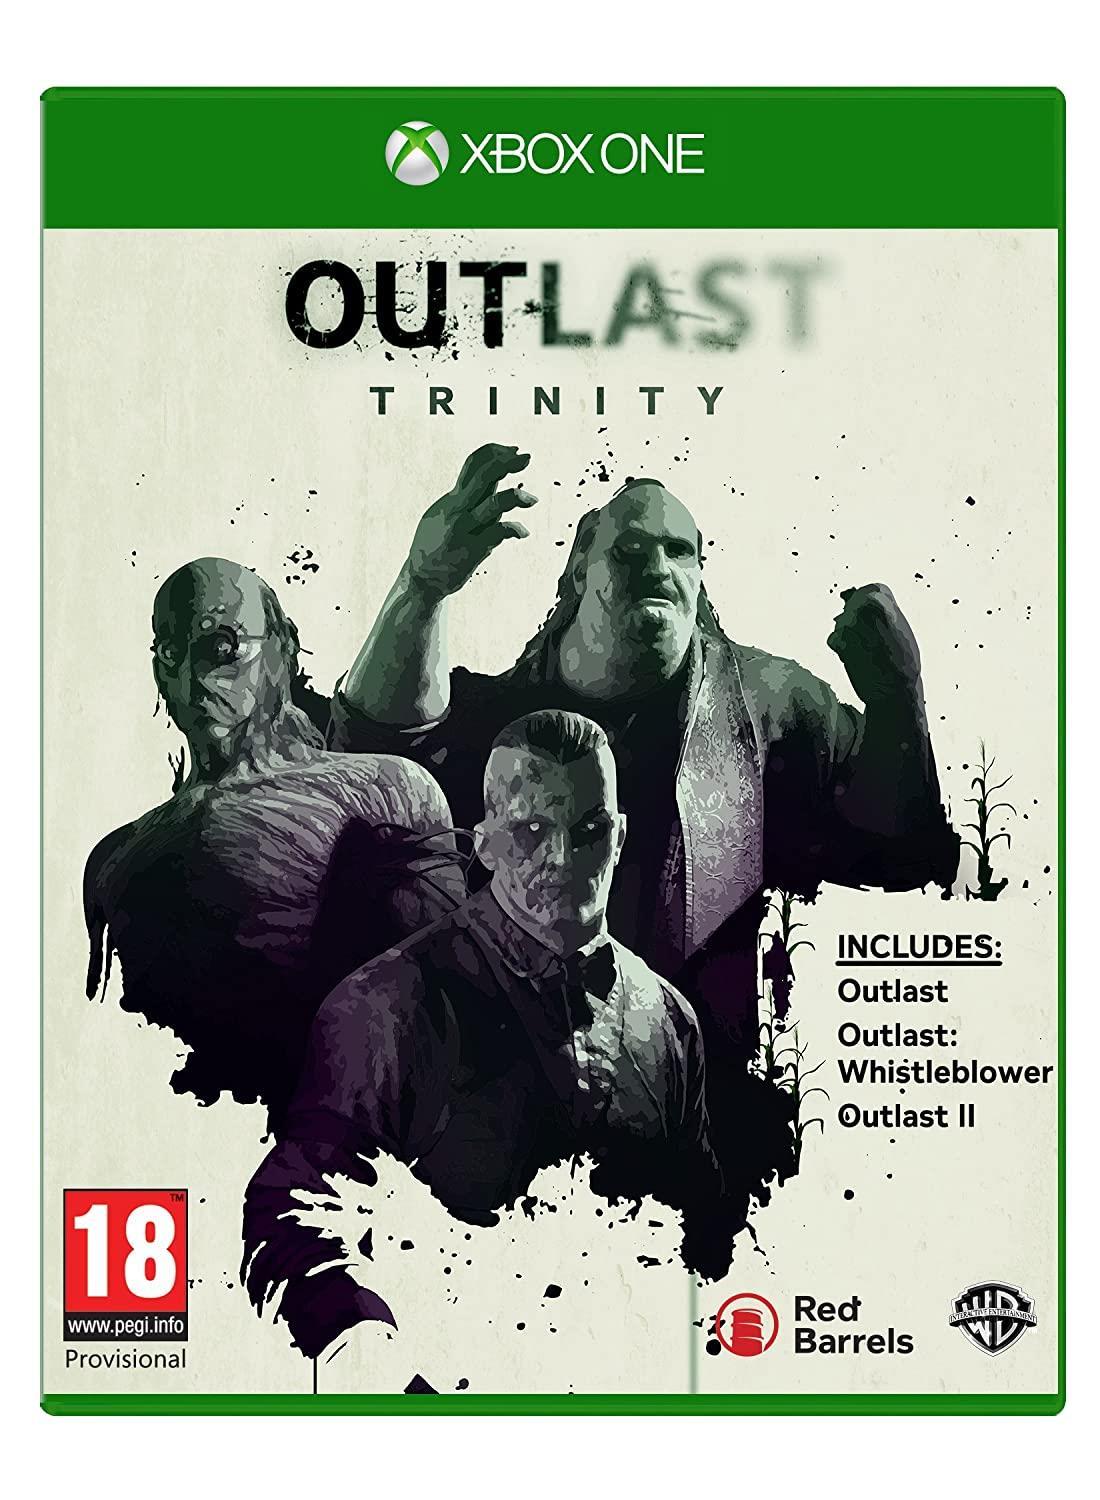 Outlast 2 - list with best horror games for Xbox One